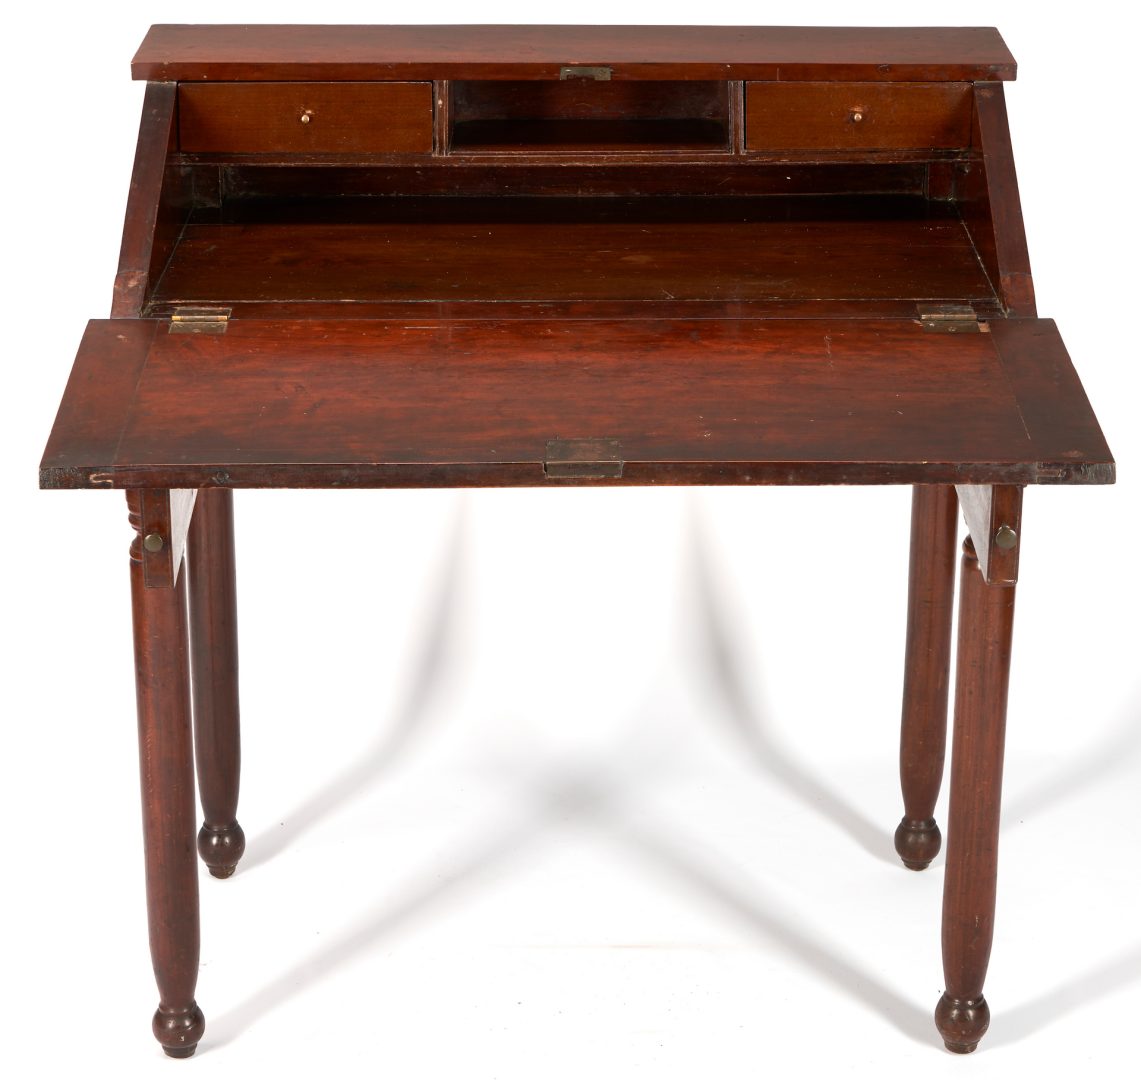 Lot 123: Exhibited Middle TN Sheraton Cherry Desk, Signed